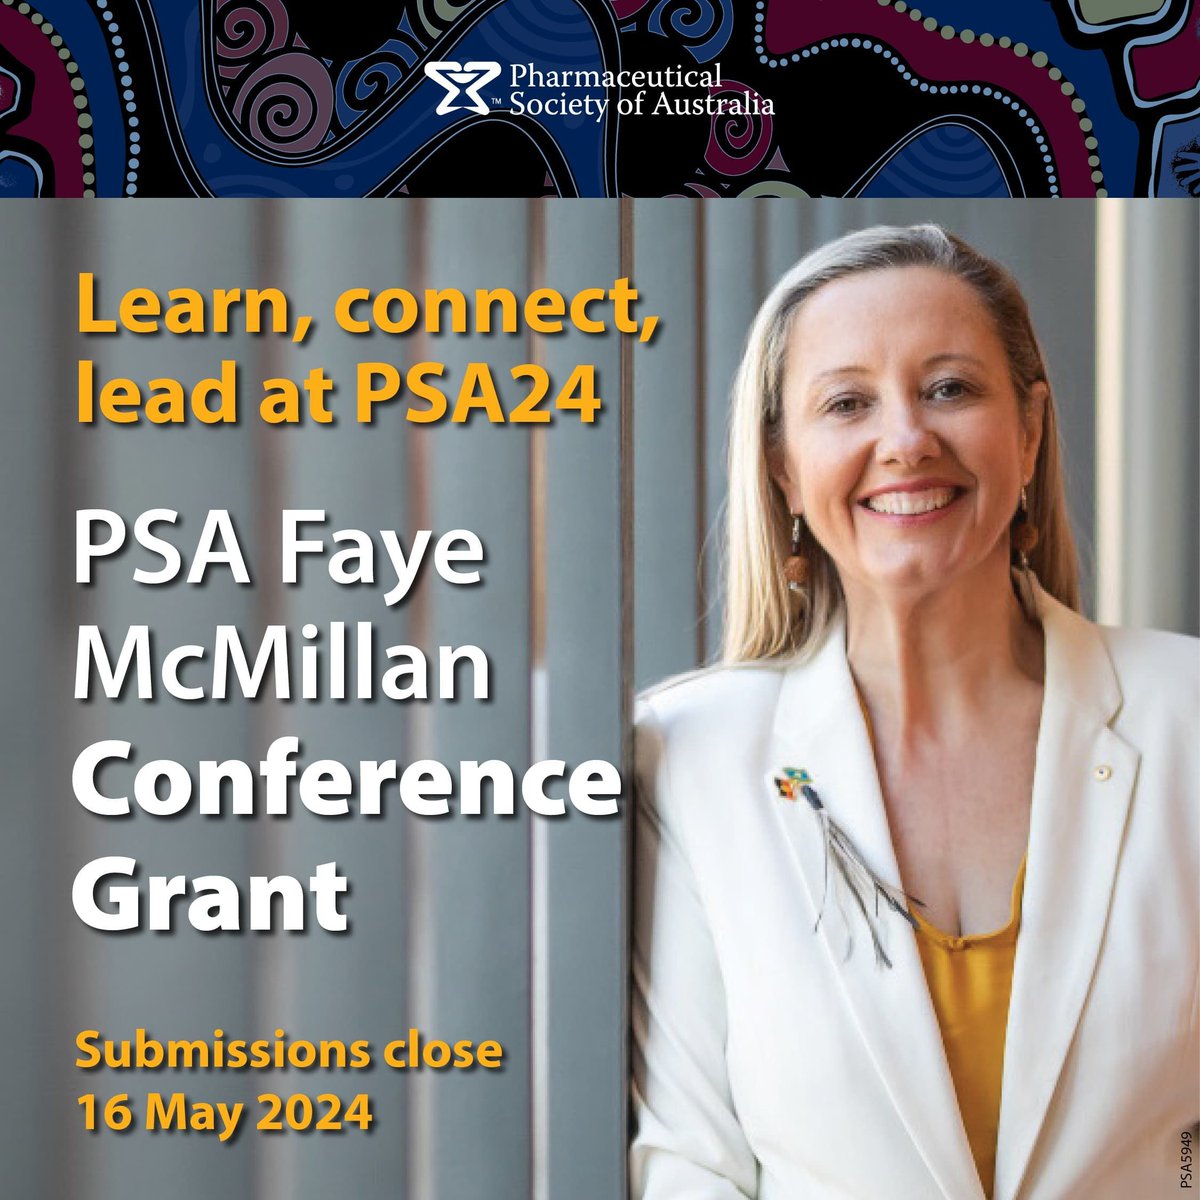 Join us for the PSA National Conference and take part in a unique opportunity to learn from leading experts and connect with pharmacist colleagues from across Australia! Register your interest now: buff.ly/4478xXN #PSAGrant #PSA24 #PSAFayeMcMillanGrant